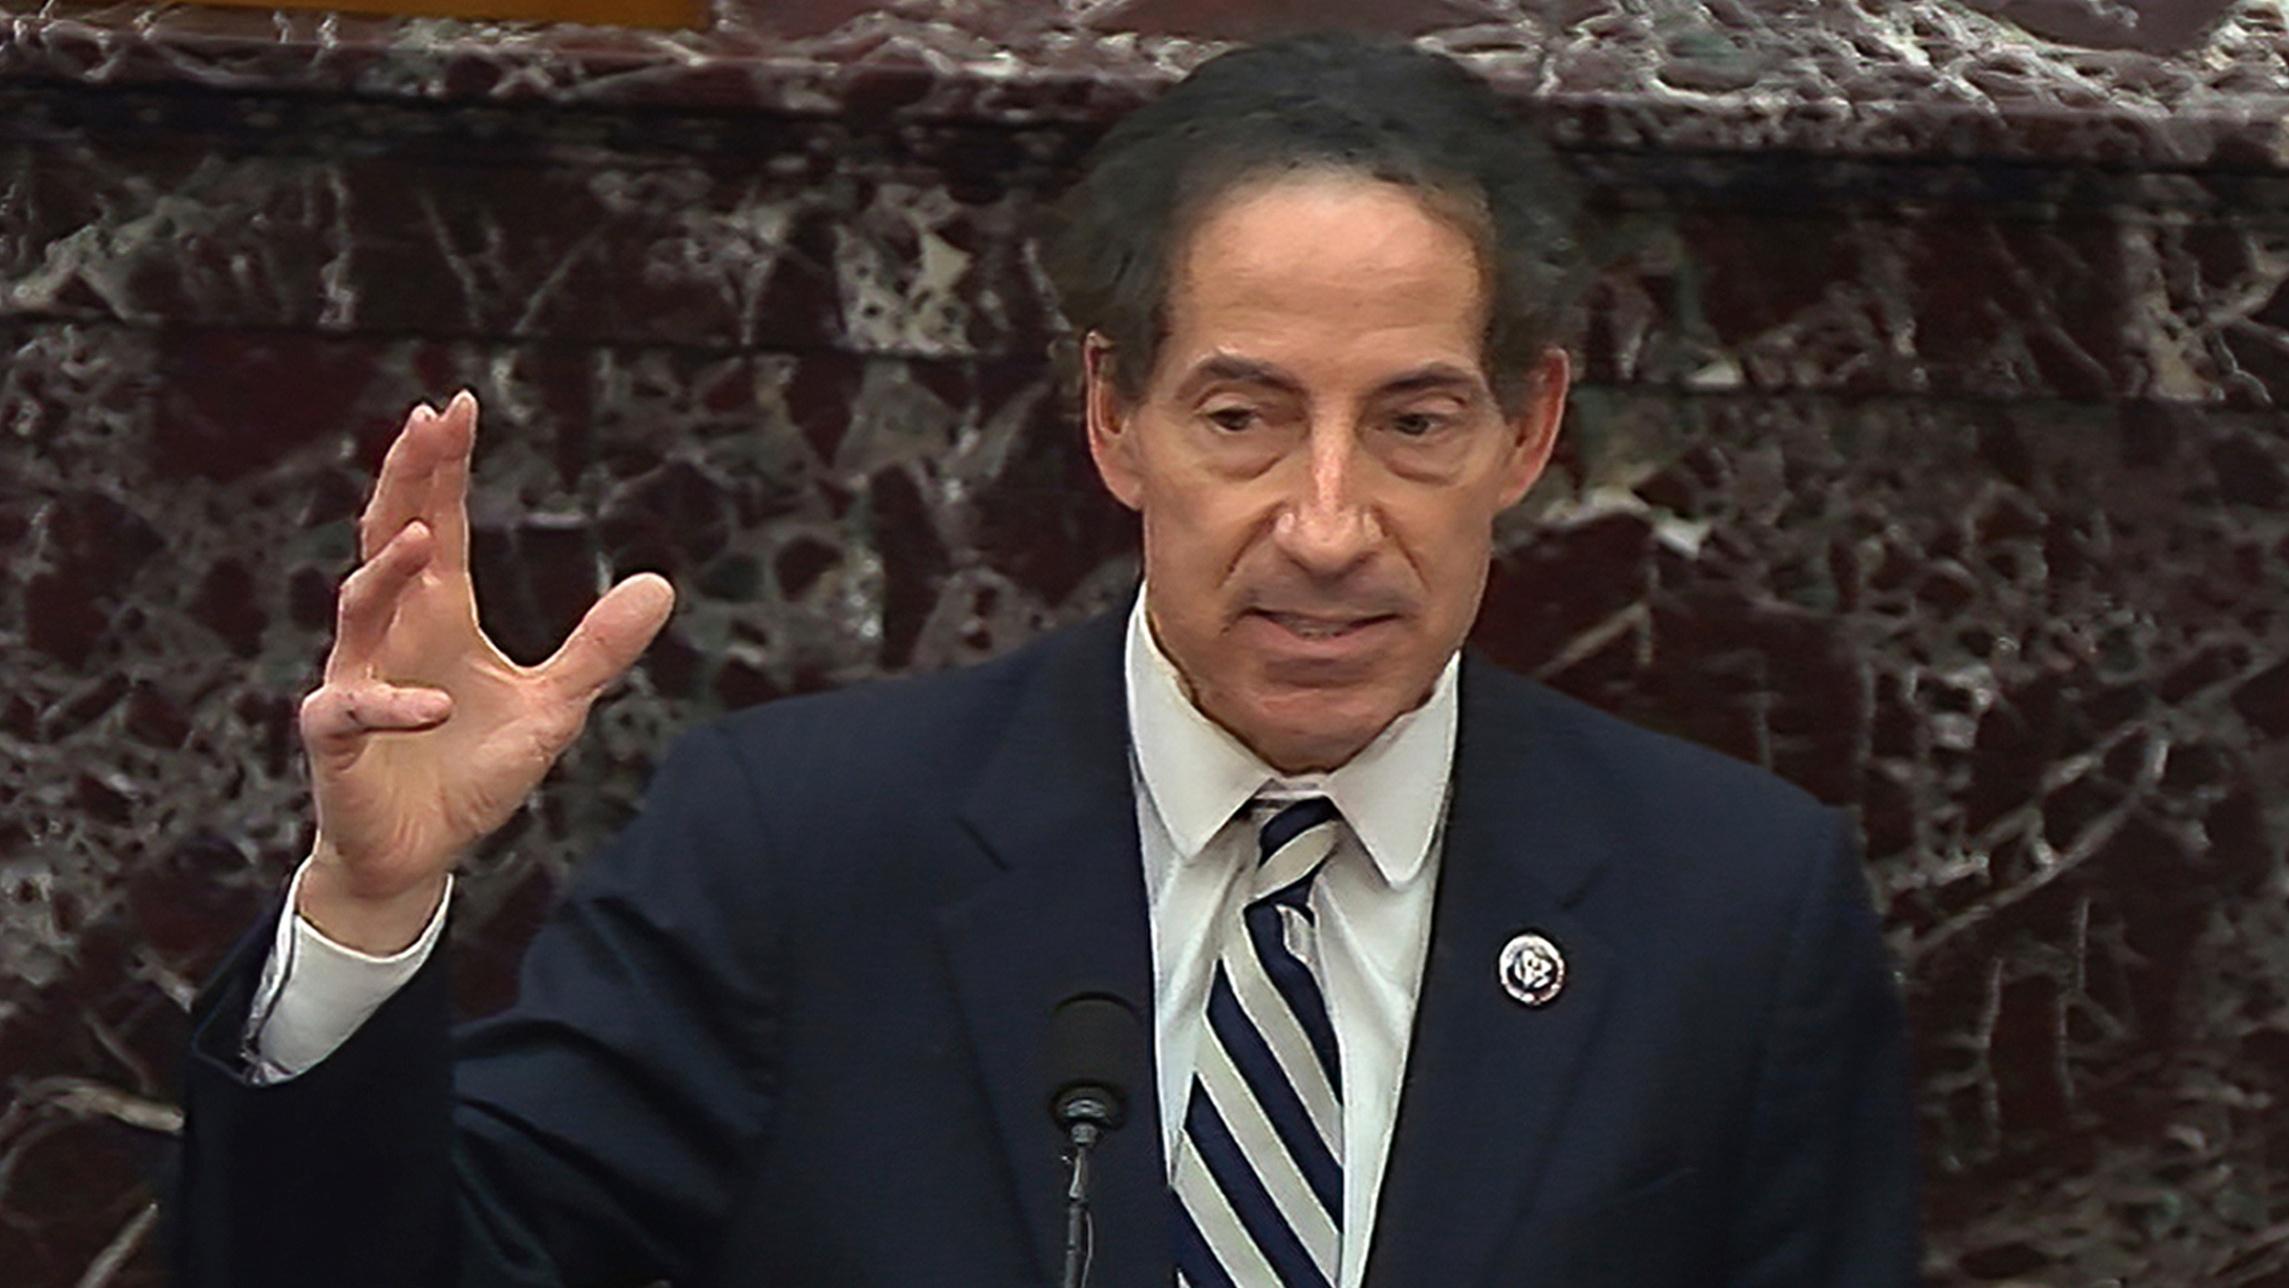 In this image from video, House impeachment manager Rep. Jamie Raskin, D-Md., speaks during the second impeachment trial of former President Donald Trump in the Senate at the U.S. Capitol in Washington, Thursday, Feb. 11, 2021. (Senate Television via AP)